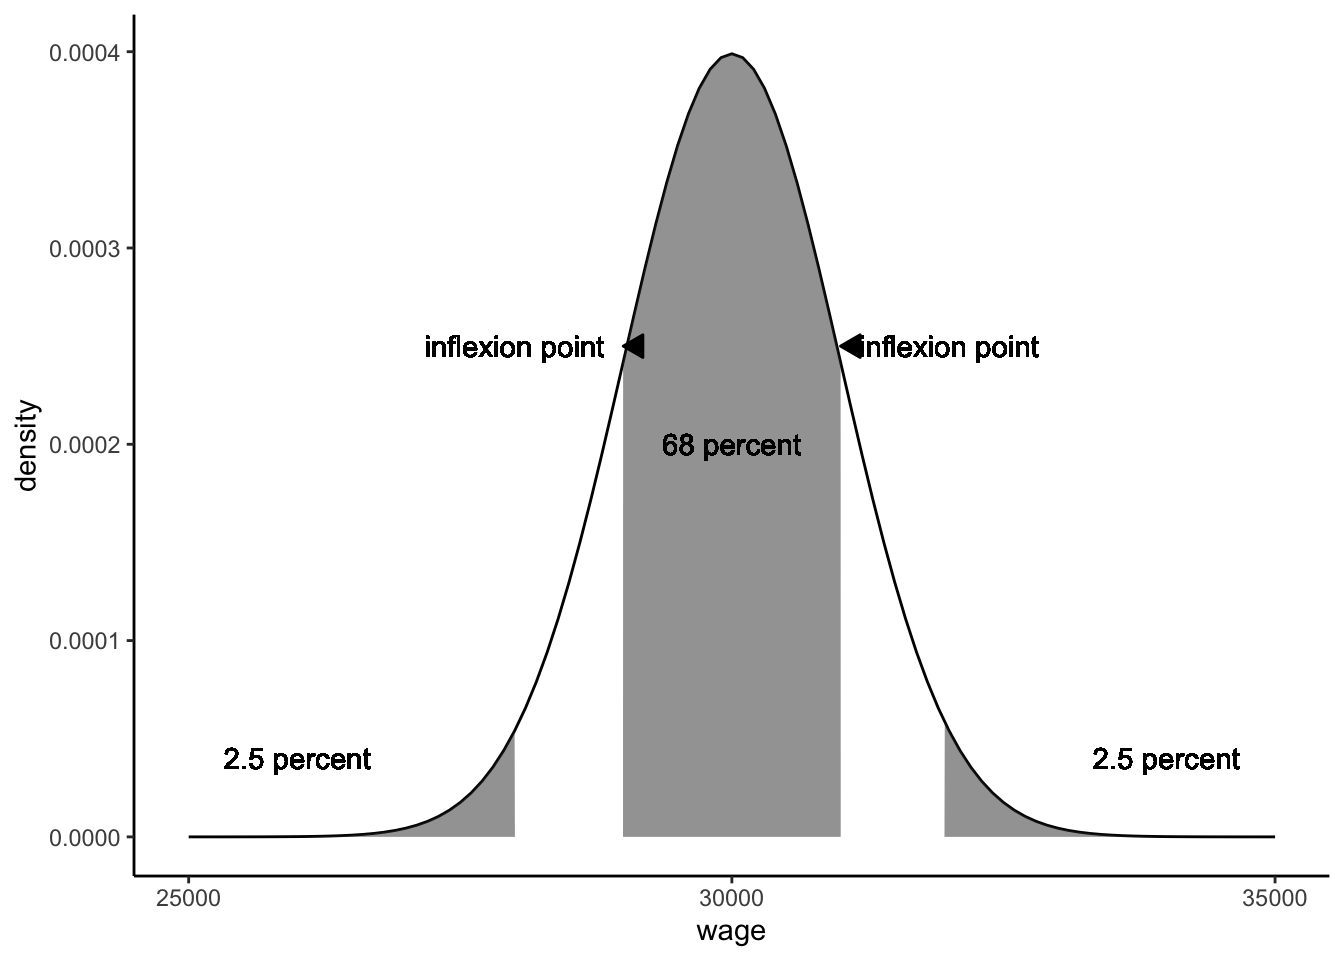 The theoretical normal distribution with mean 30,000 and standard deviation 1000.